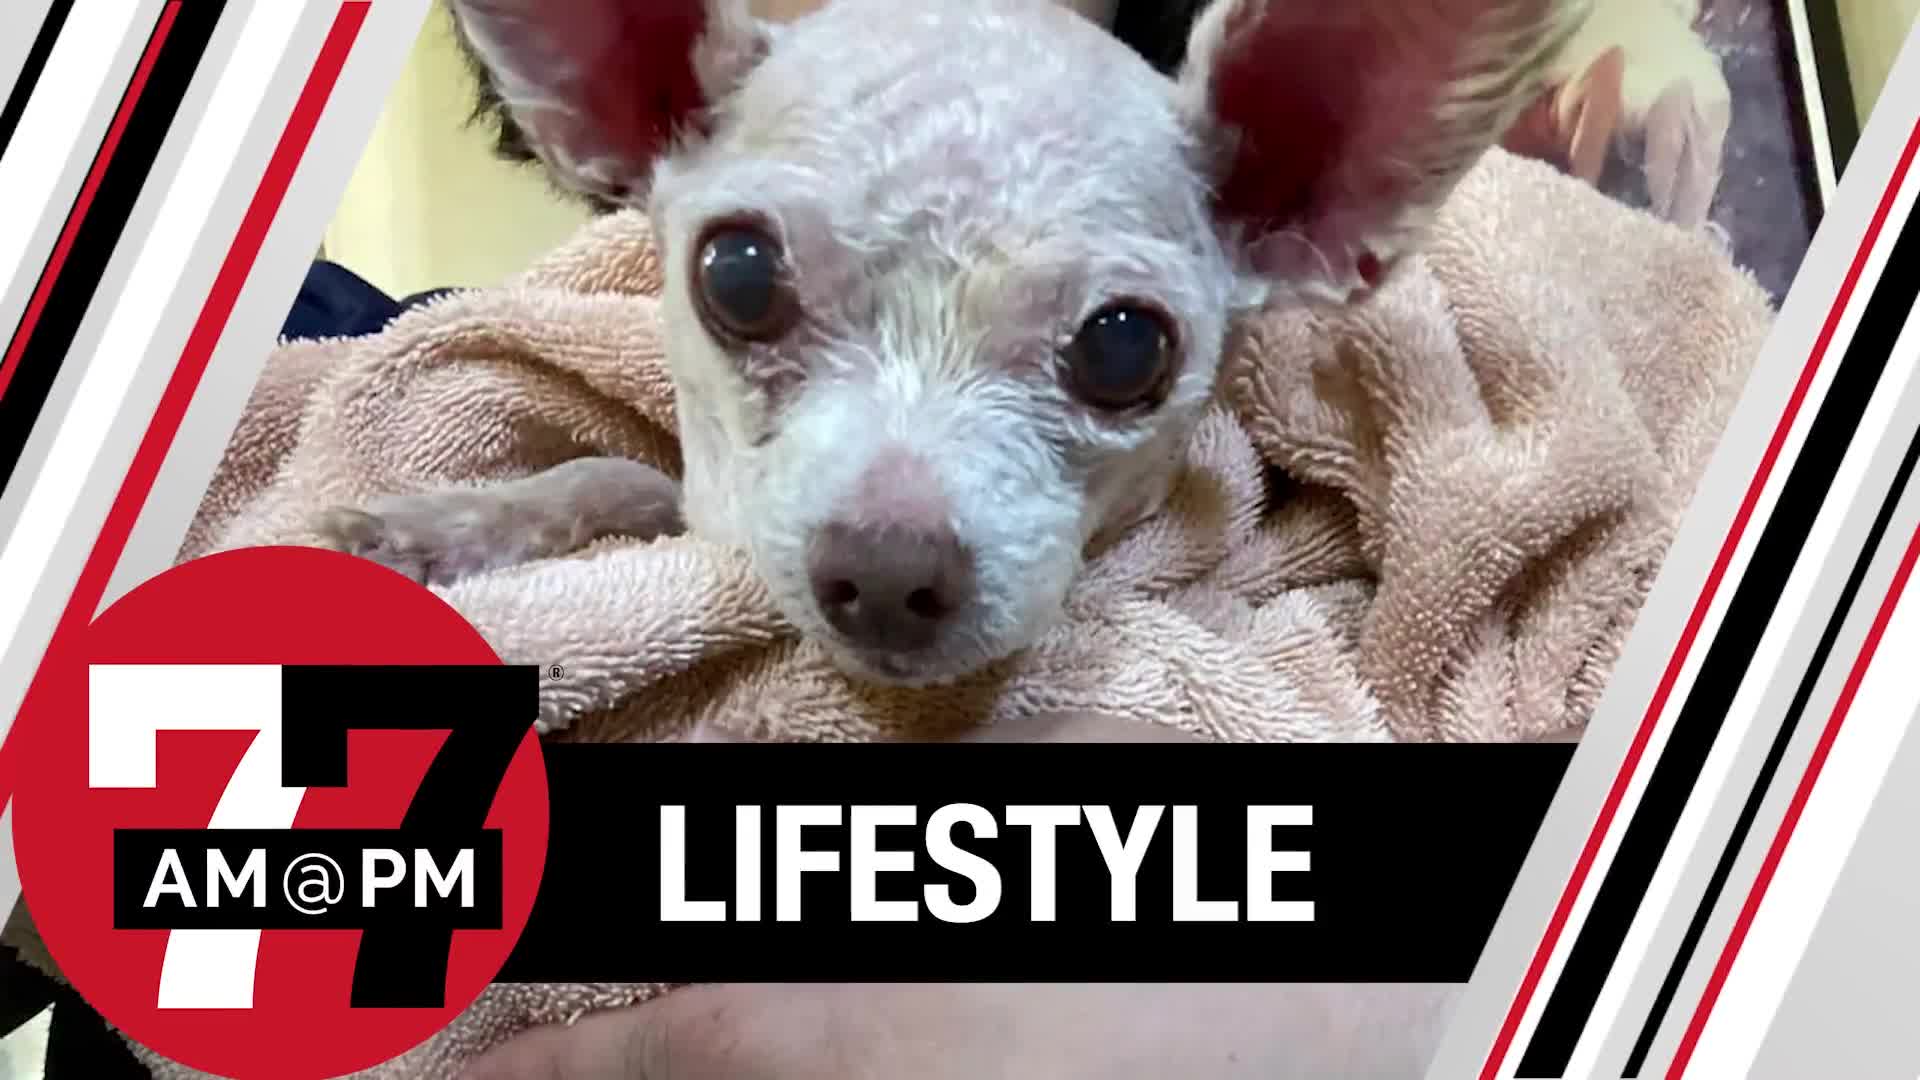 Gizmo, dog missing in Las Vegas since 2015, found alive